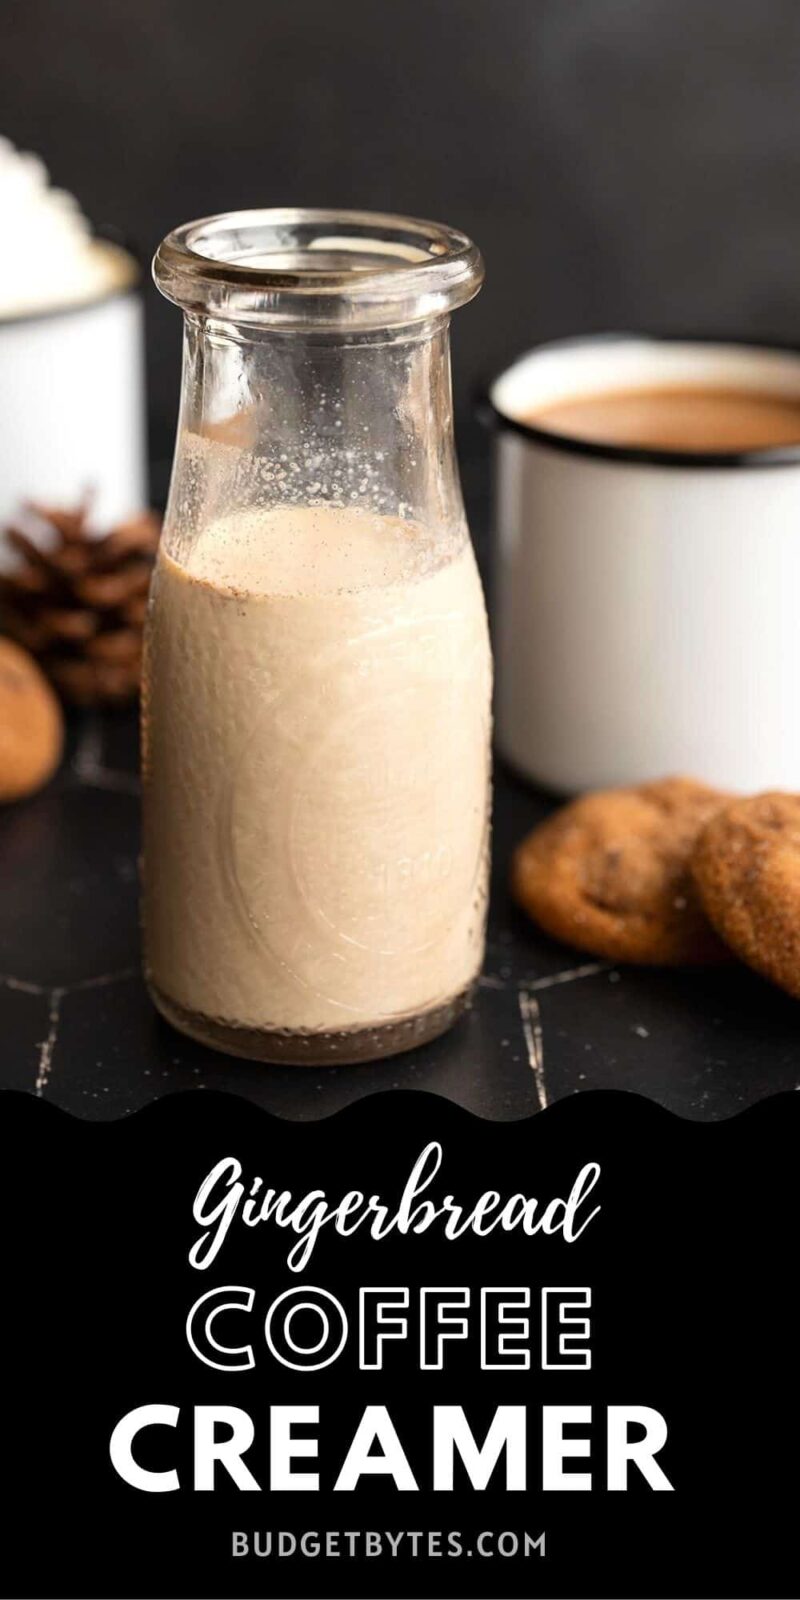 gingerbread coffee creamer in a glass milk bottle, title text at the bottom